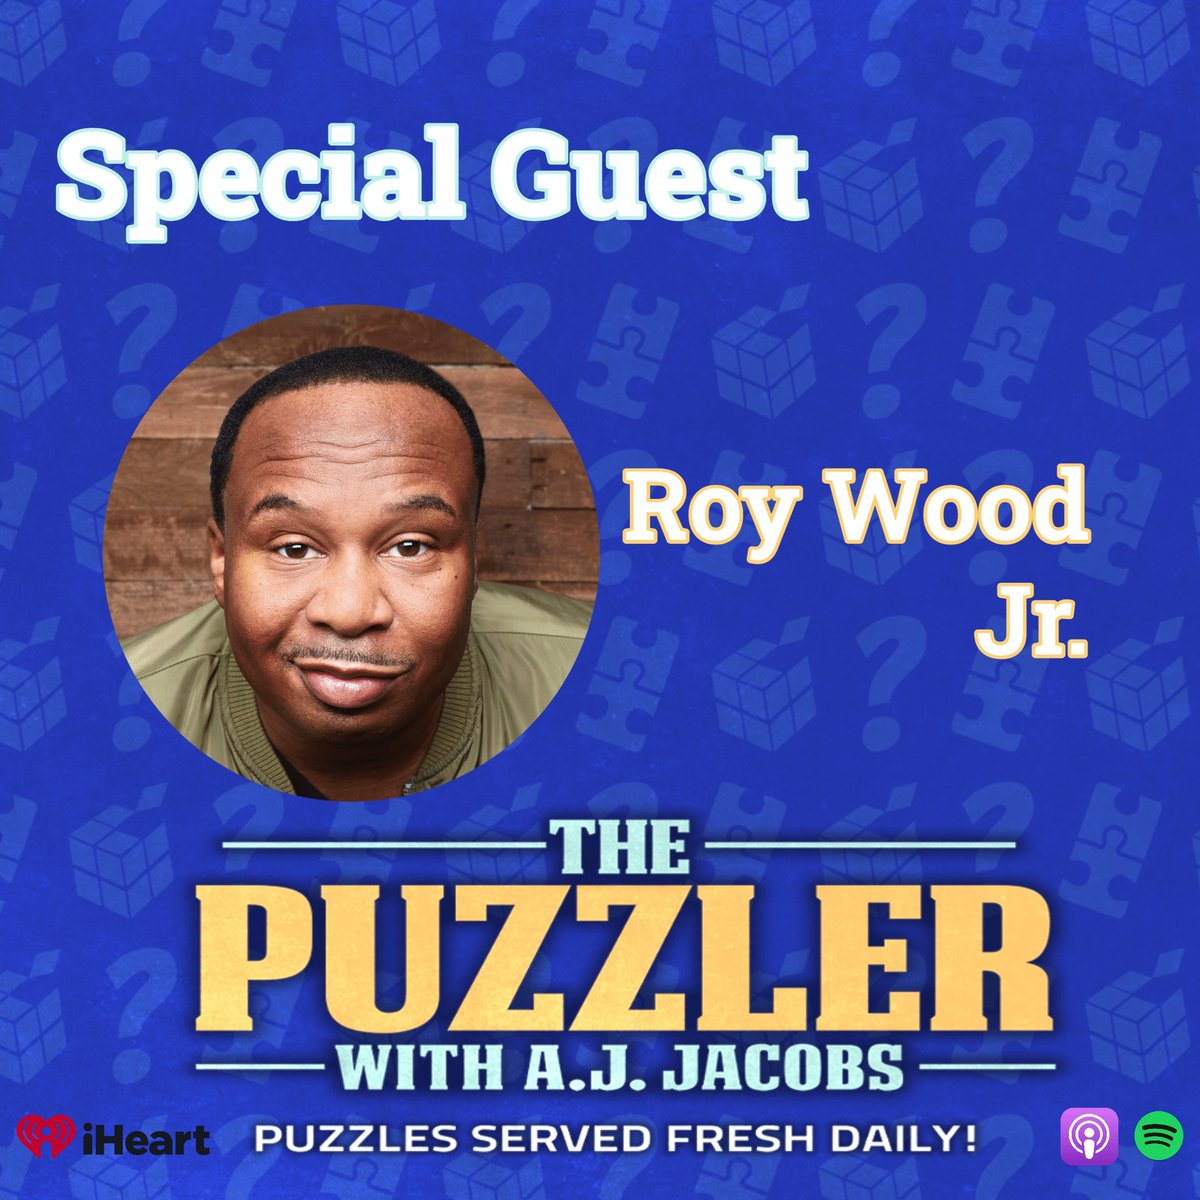 This week is @roywoodjr week on “The Puzzler” podcast. Please listen if you enjoy high-quality audio entertainment! He is very funny. iheart.com/podcast/1119-t…